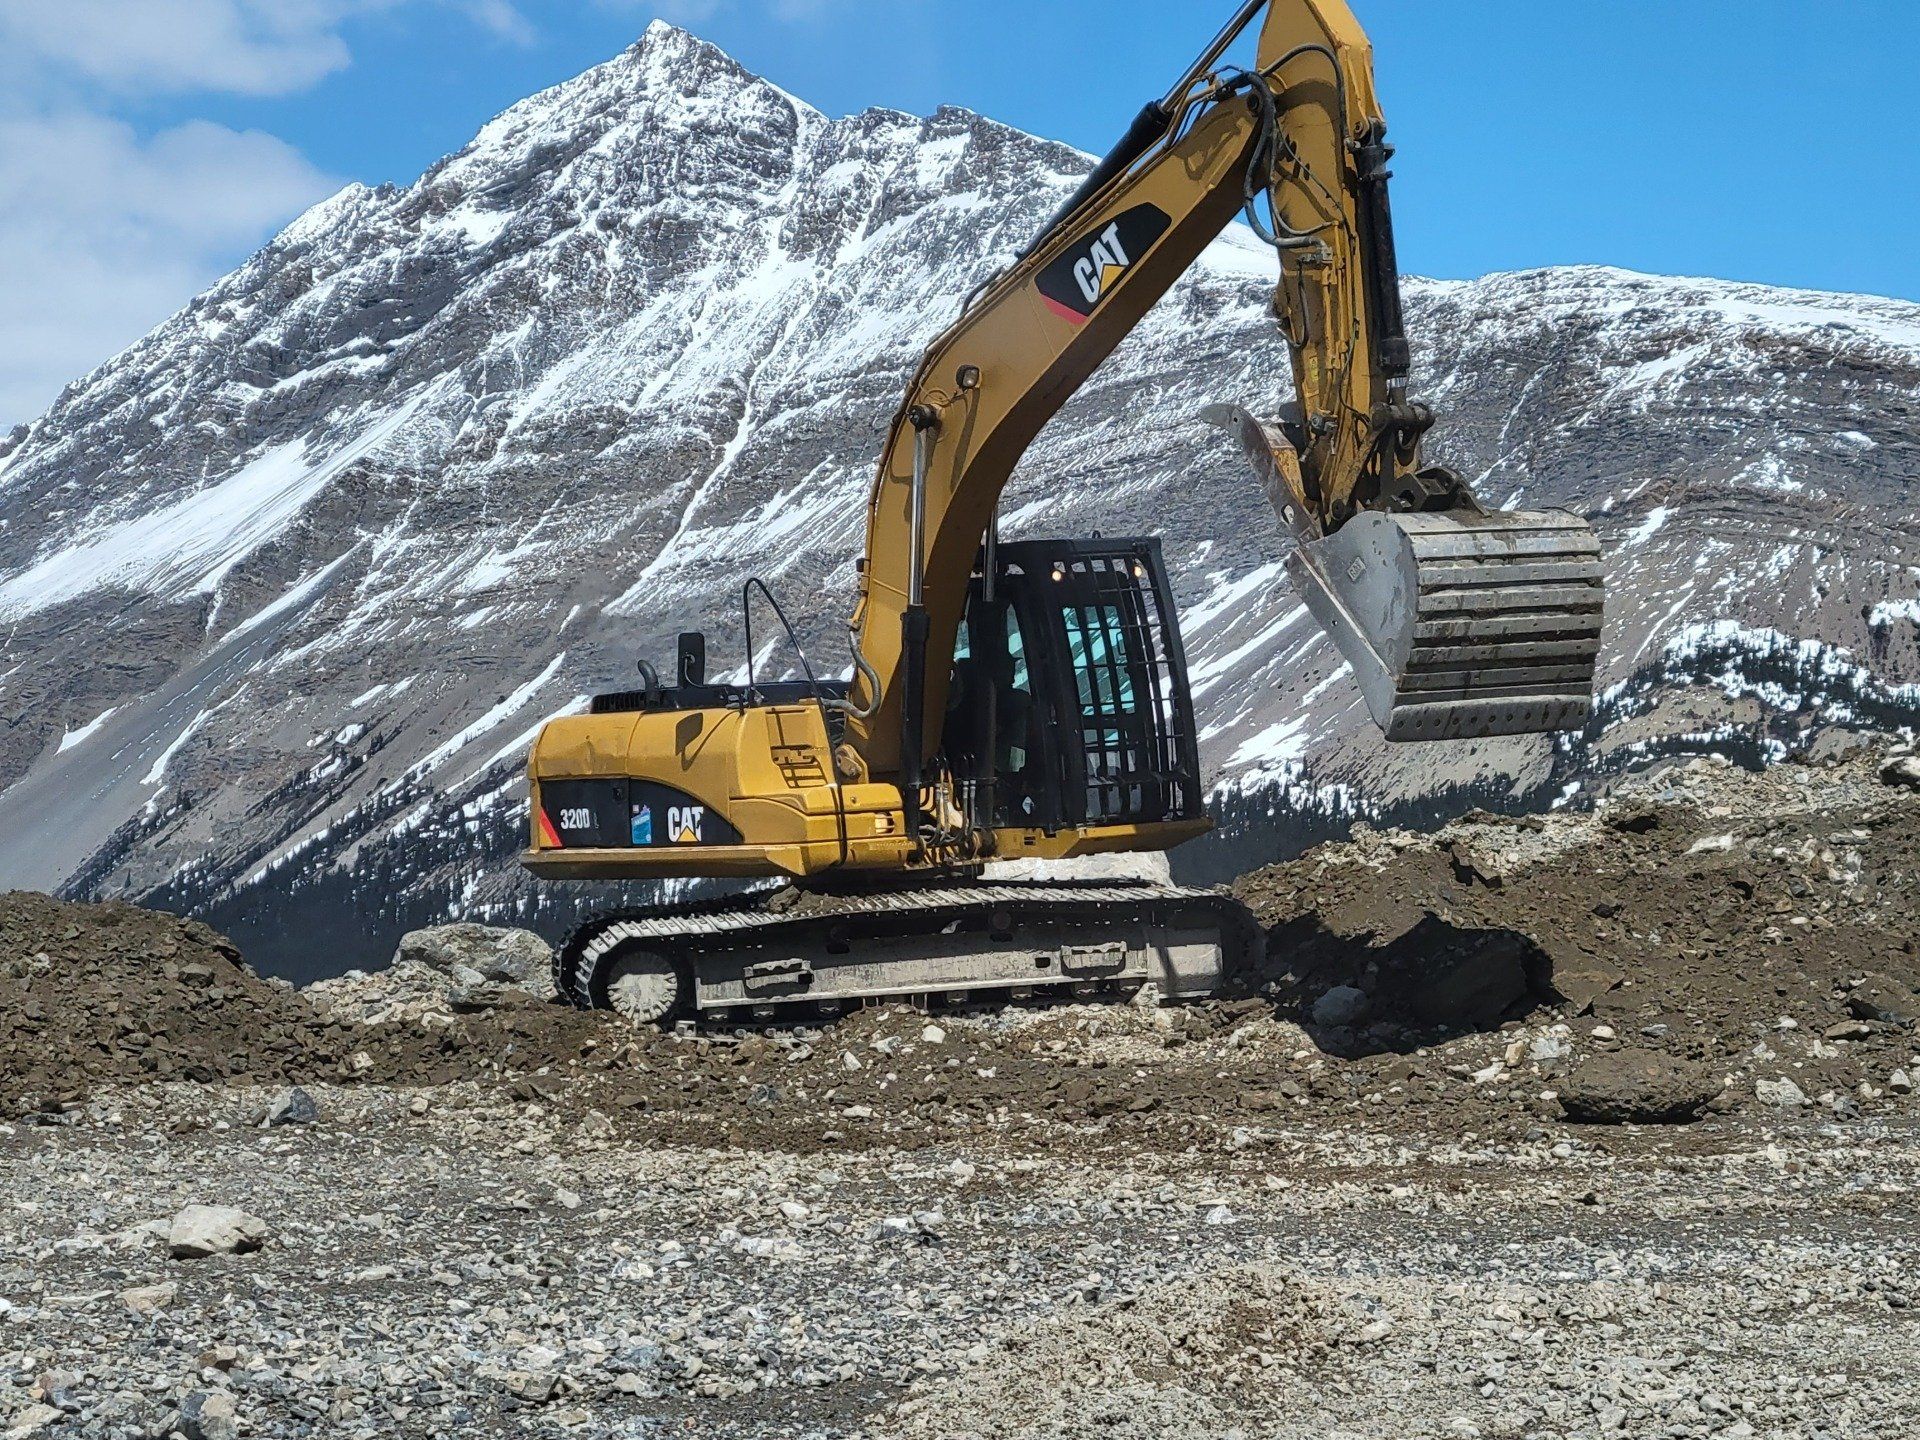 A large excavator used in clearing unwanted earth